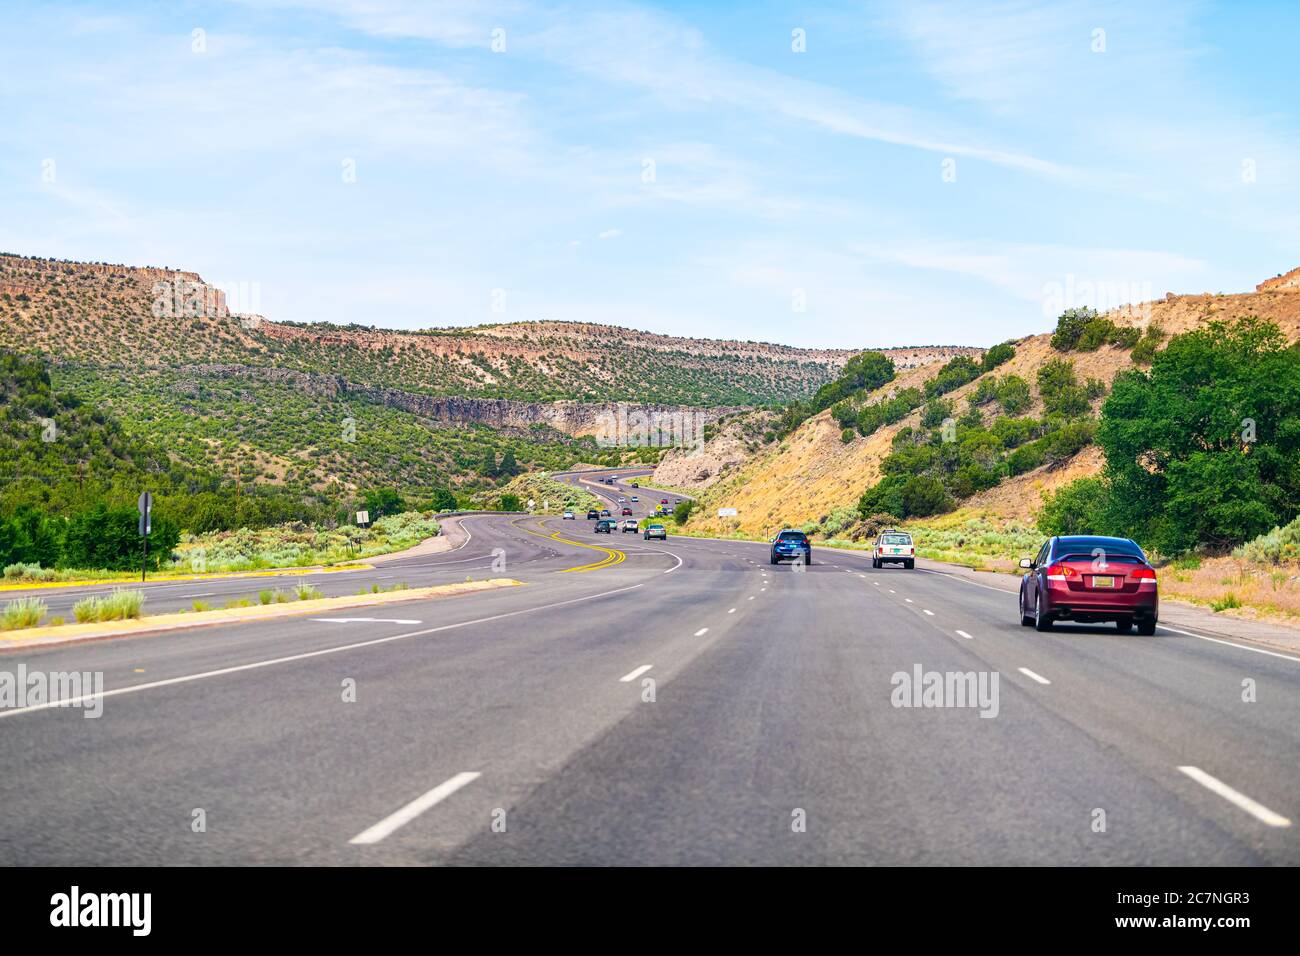 Santa Fe, USA - June 17, 2019: New Mexico desert with cars on road highway to Los Alamos driving with street 502 west and Bandelier National Monument Stock Photo